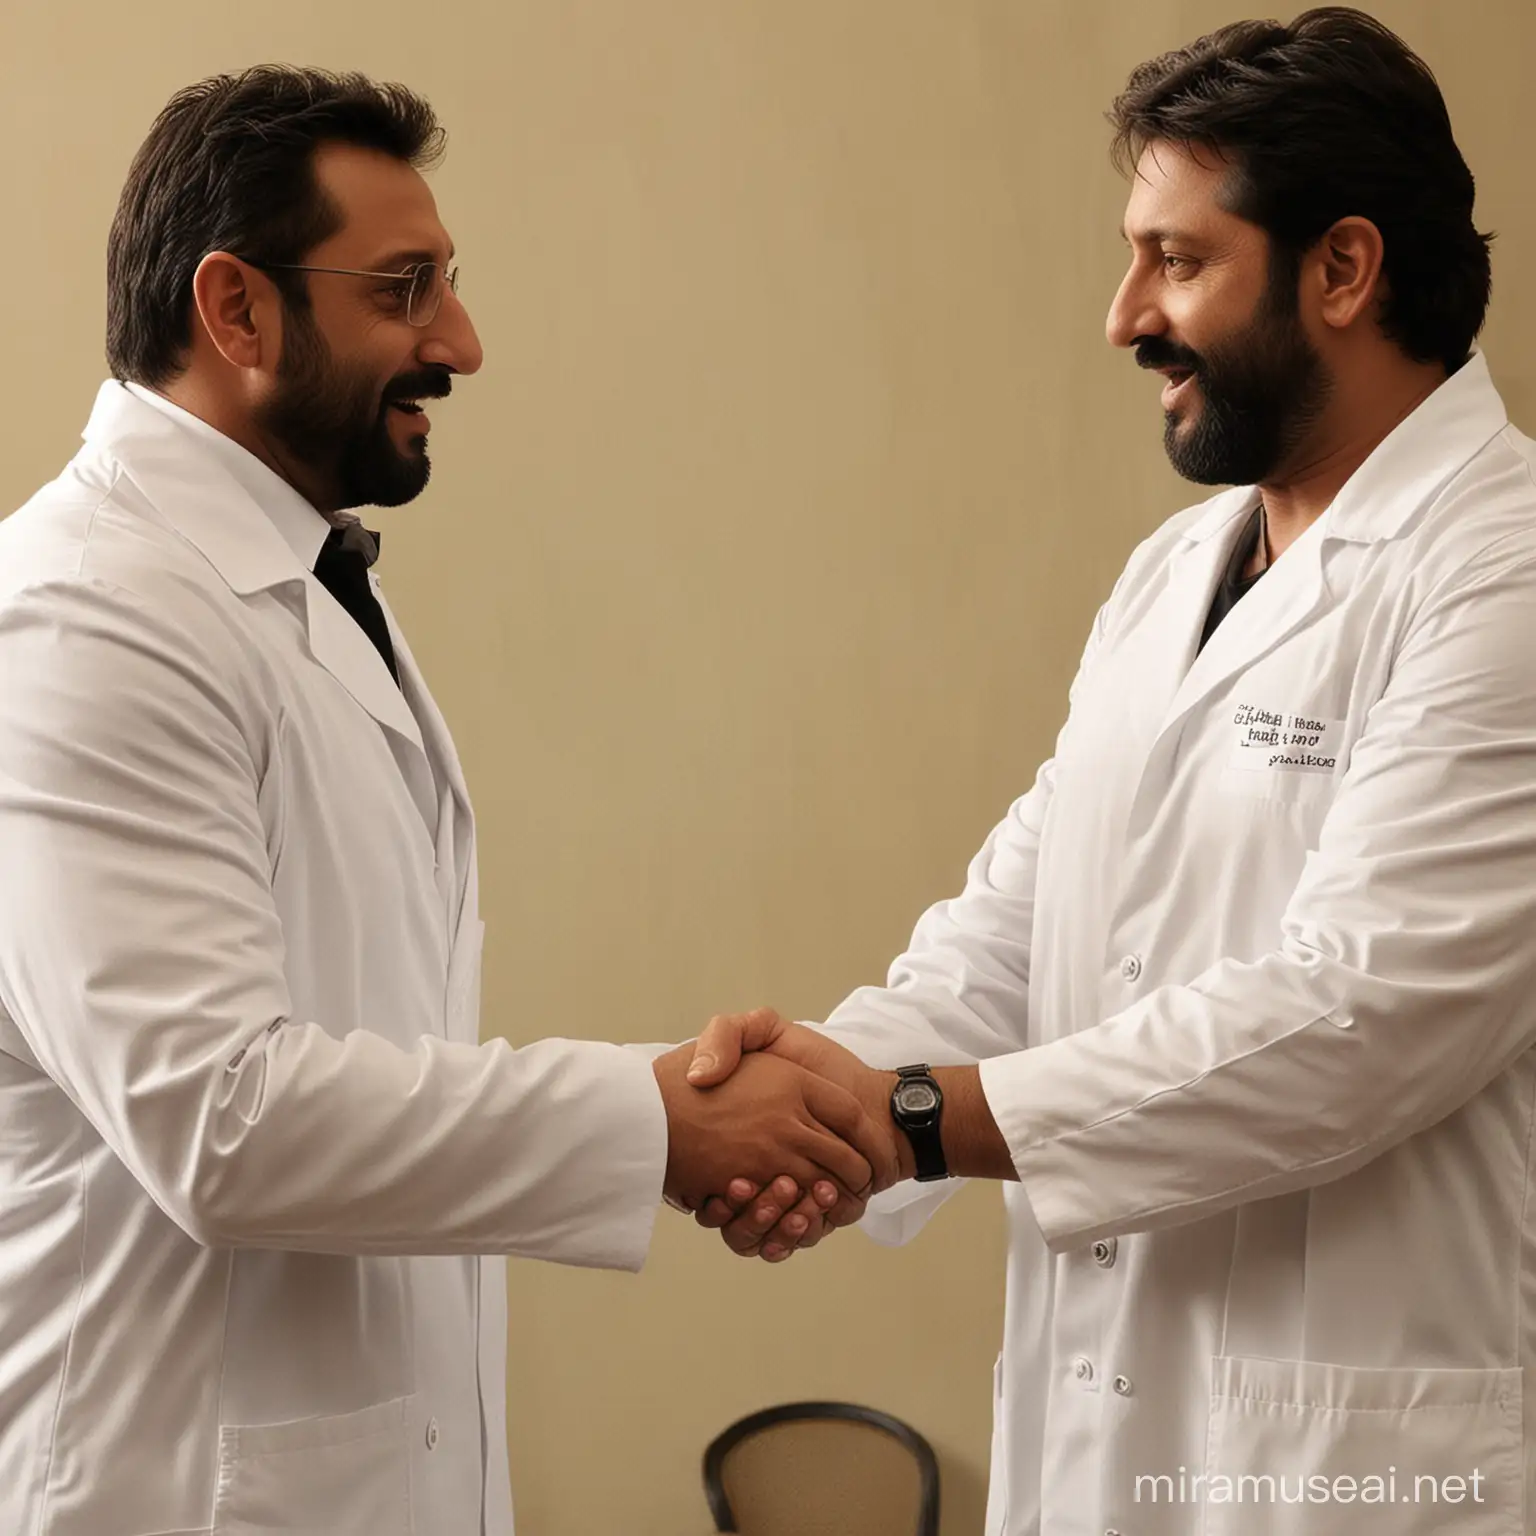 Sanjay Dutt and Arshad Warsi Dressed as Doctors Shaking Hands